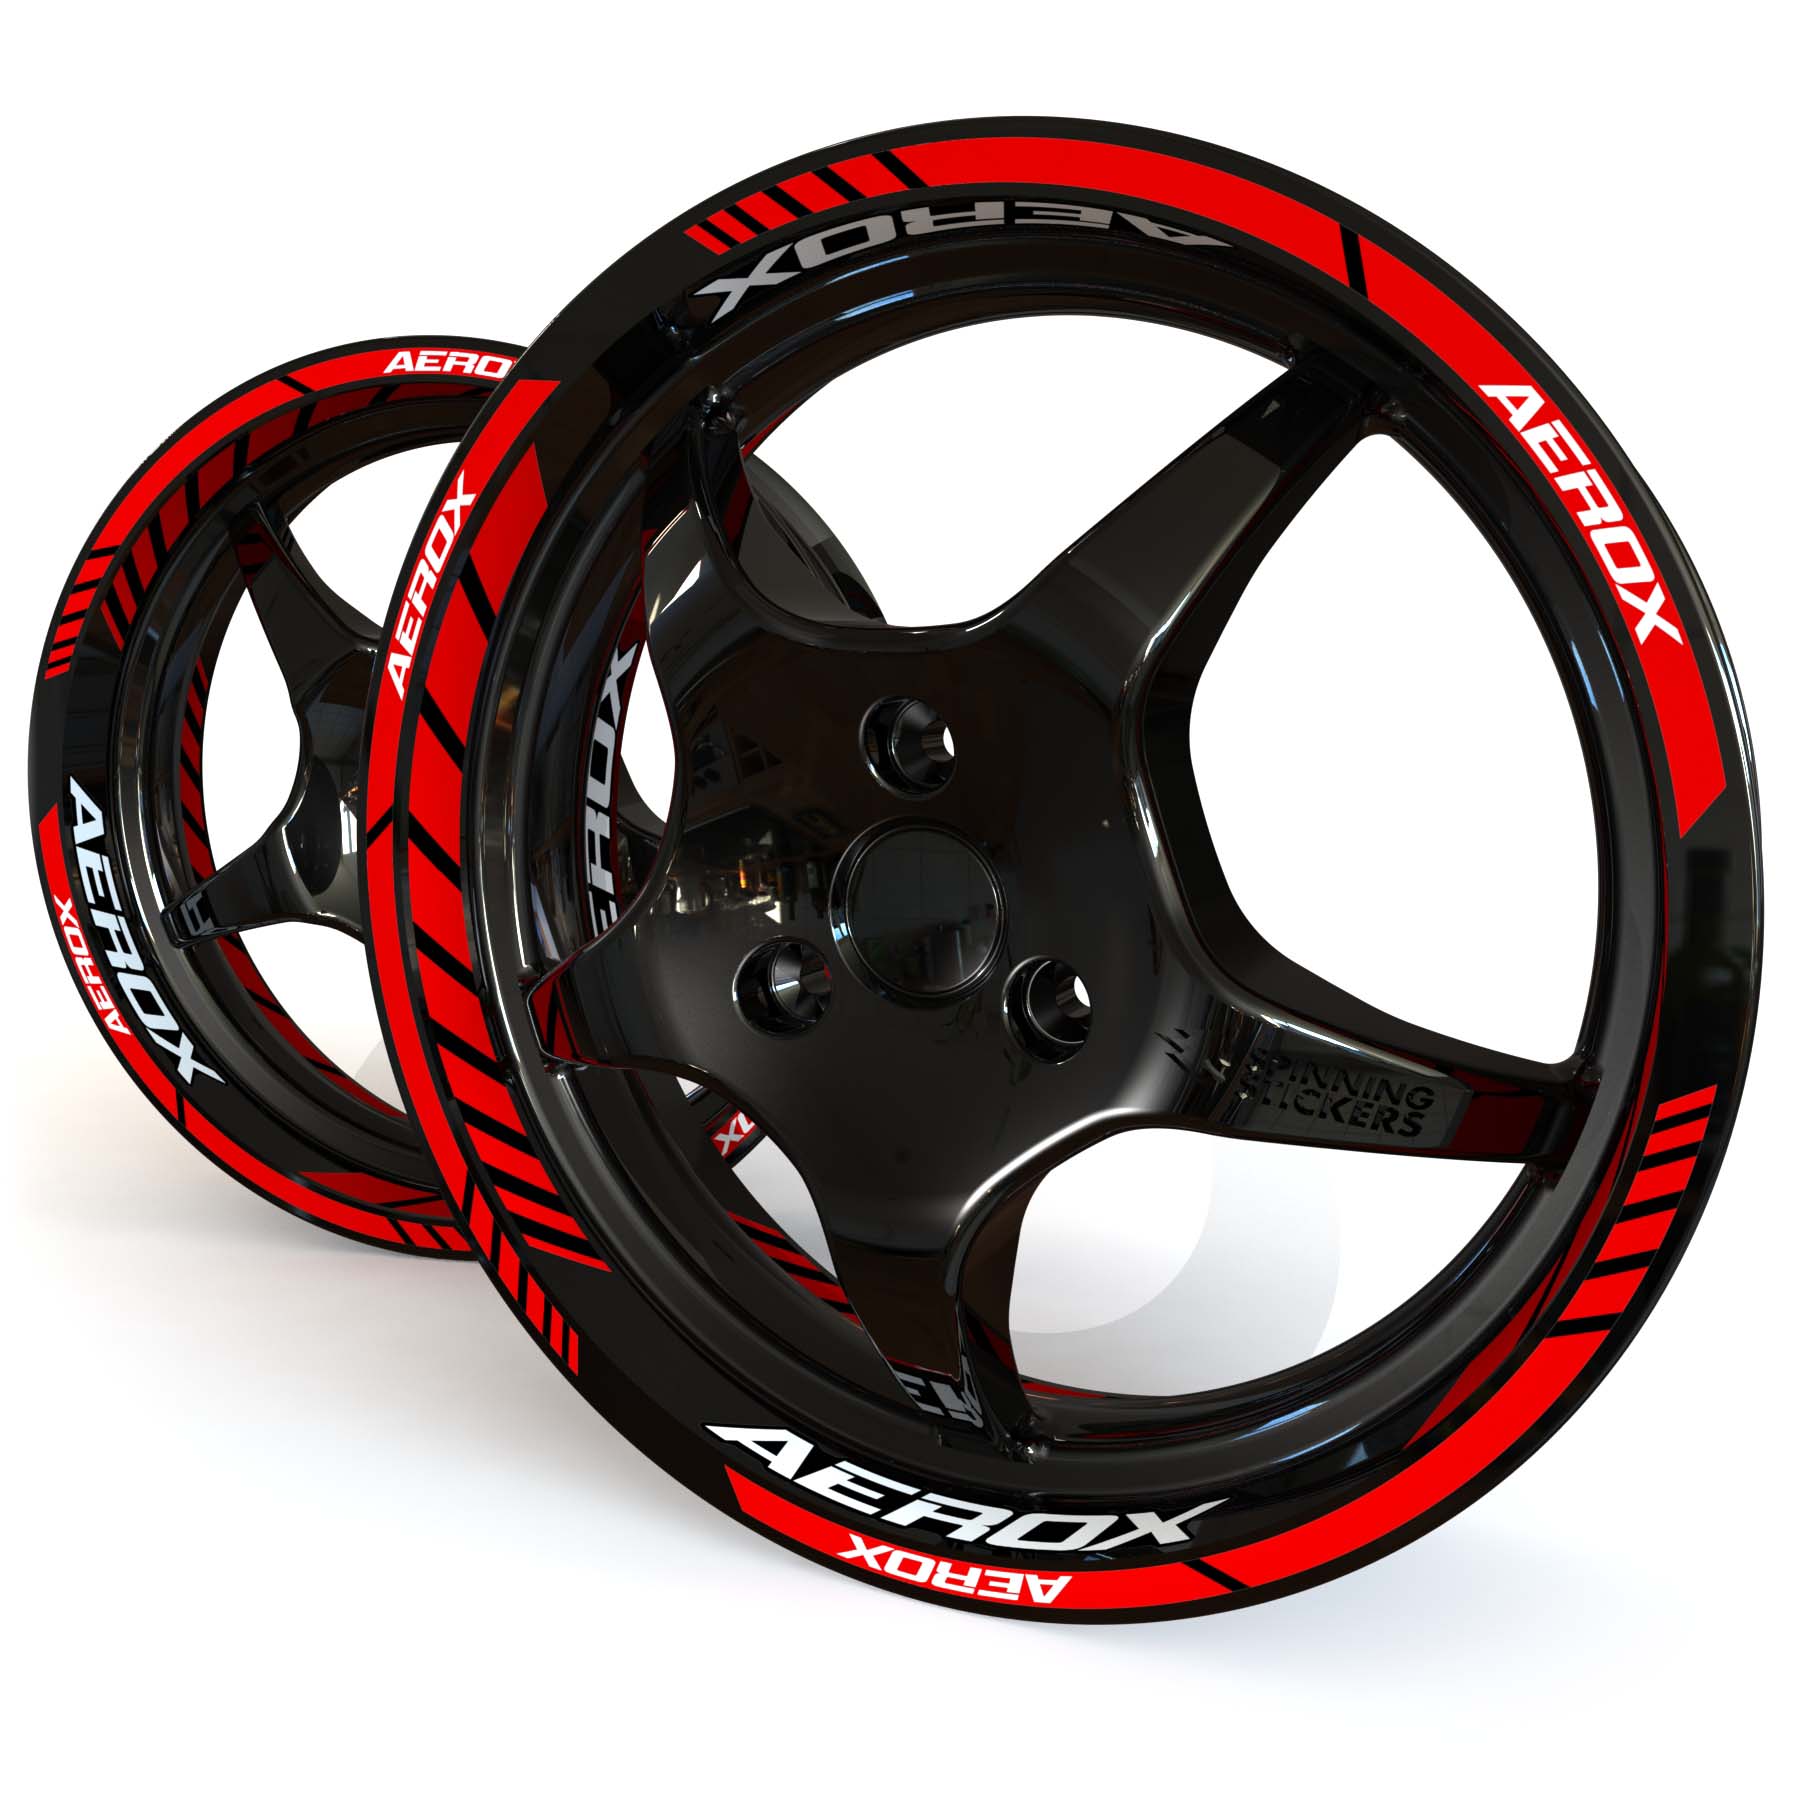 Red and white Yamaha Aerox wheel stickers on a black 12 inch moped rim